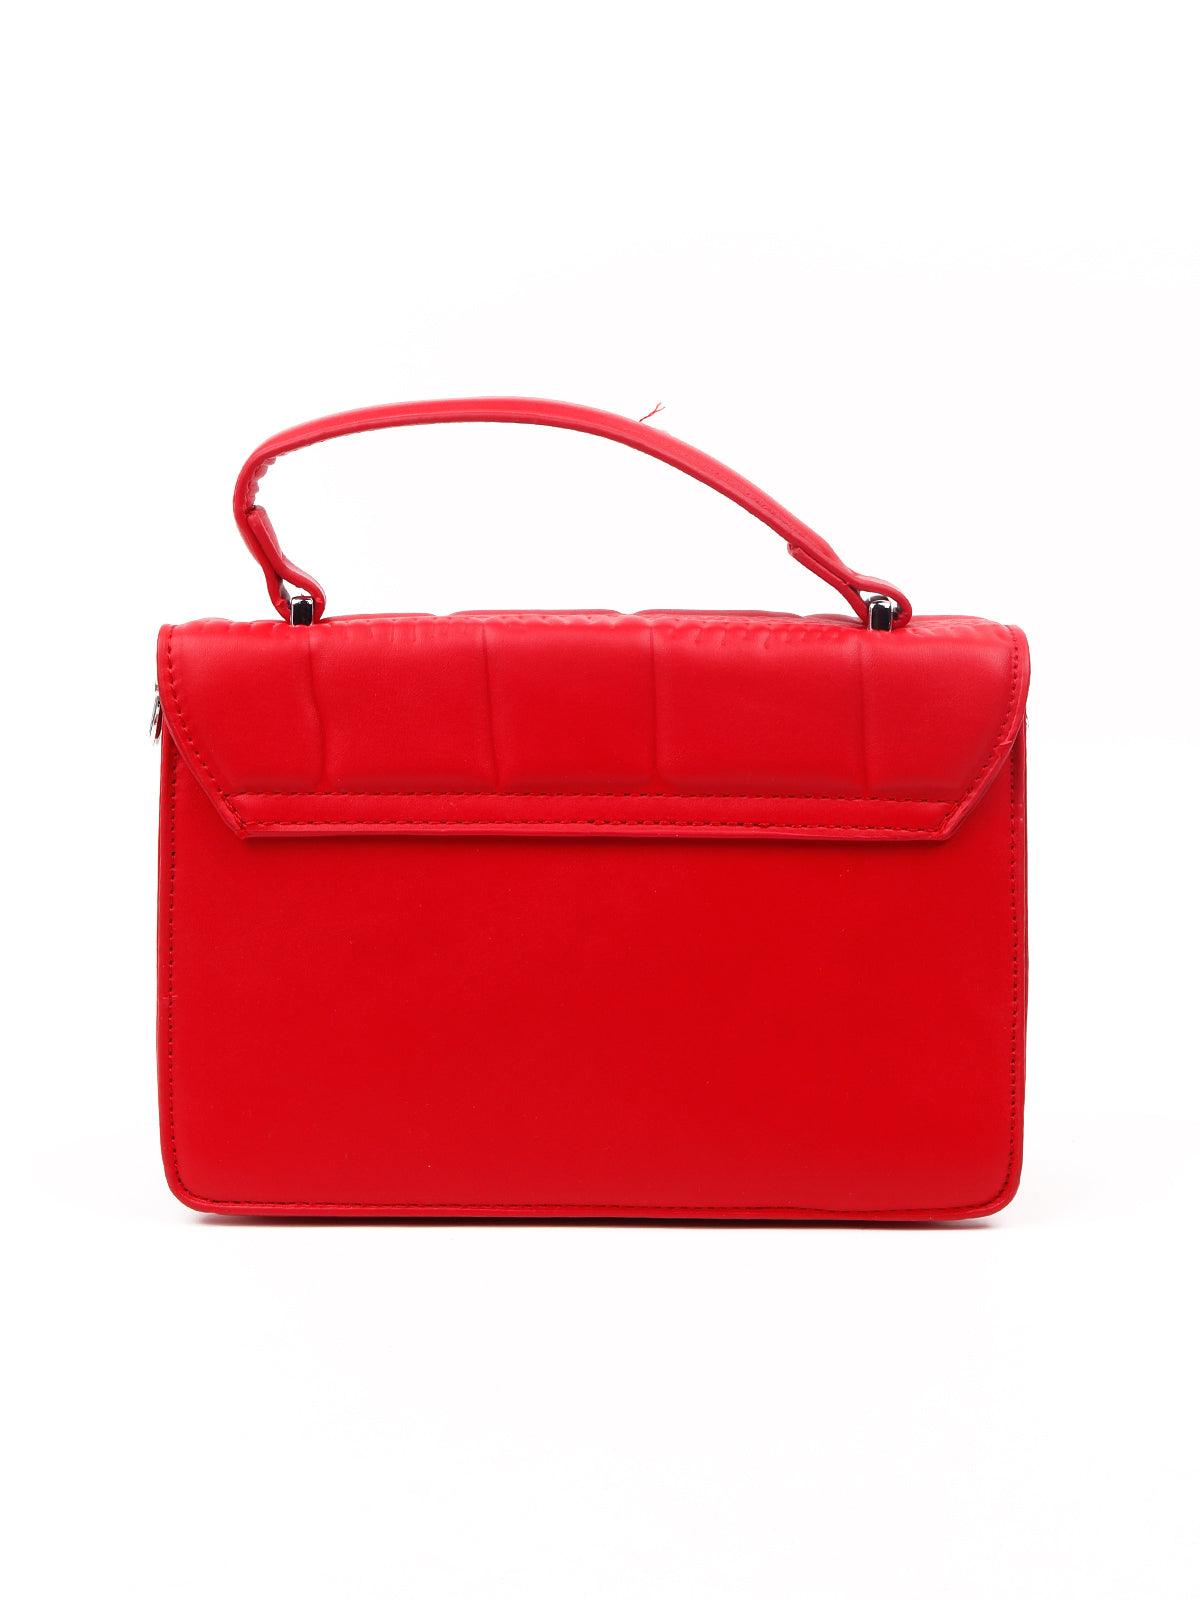 Bright red textured soft sling bag embellished with a gold chunky chain - Odette